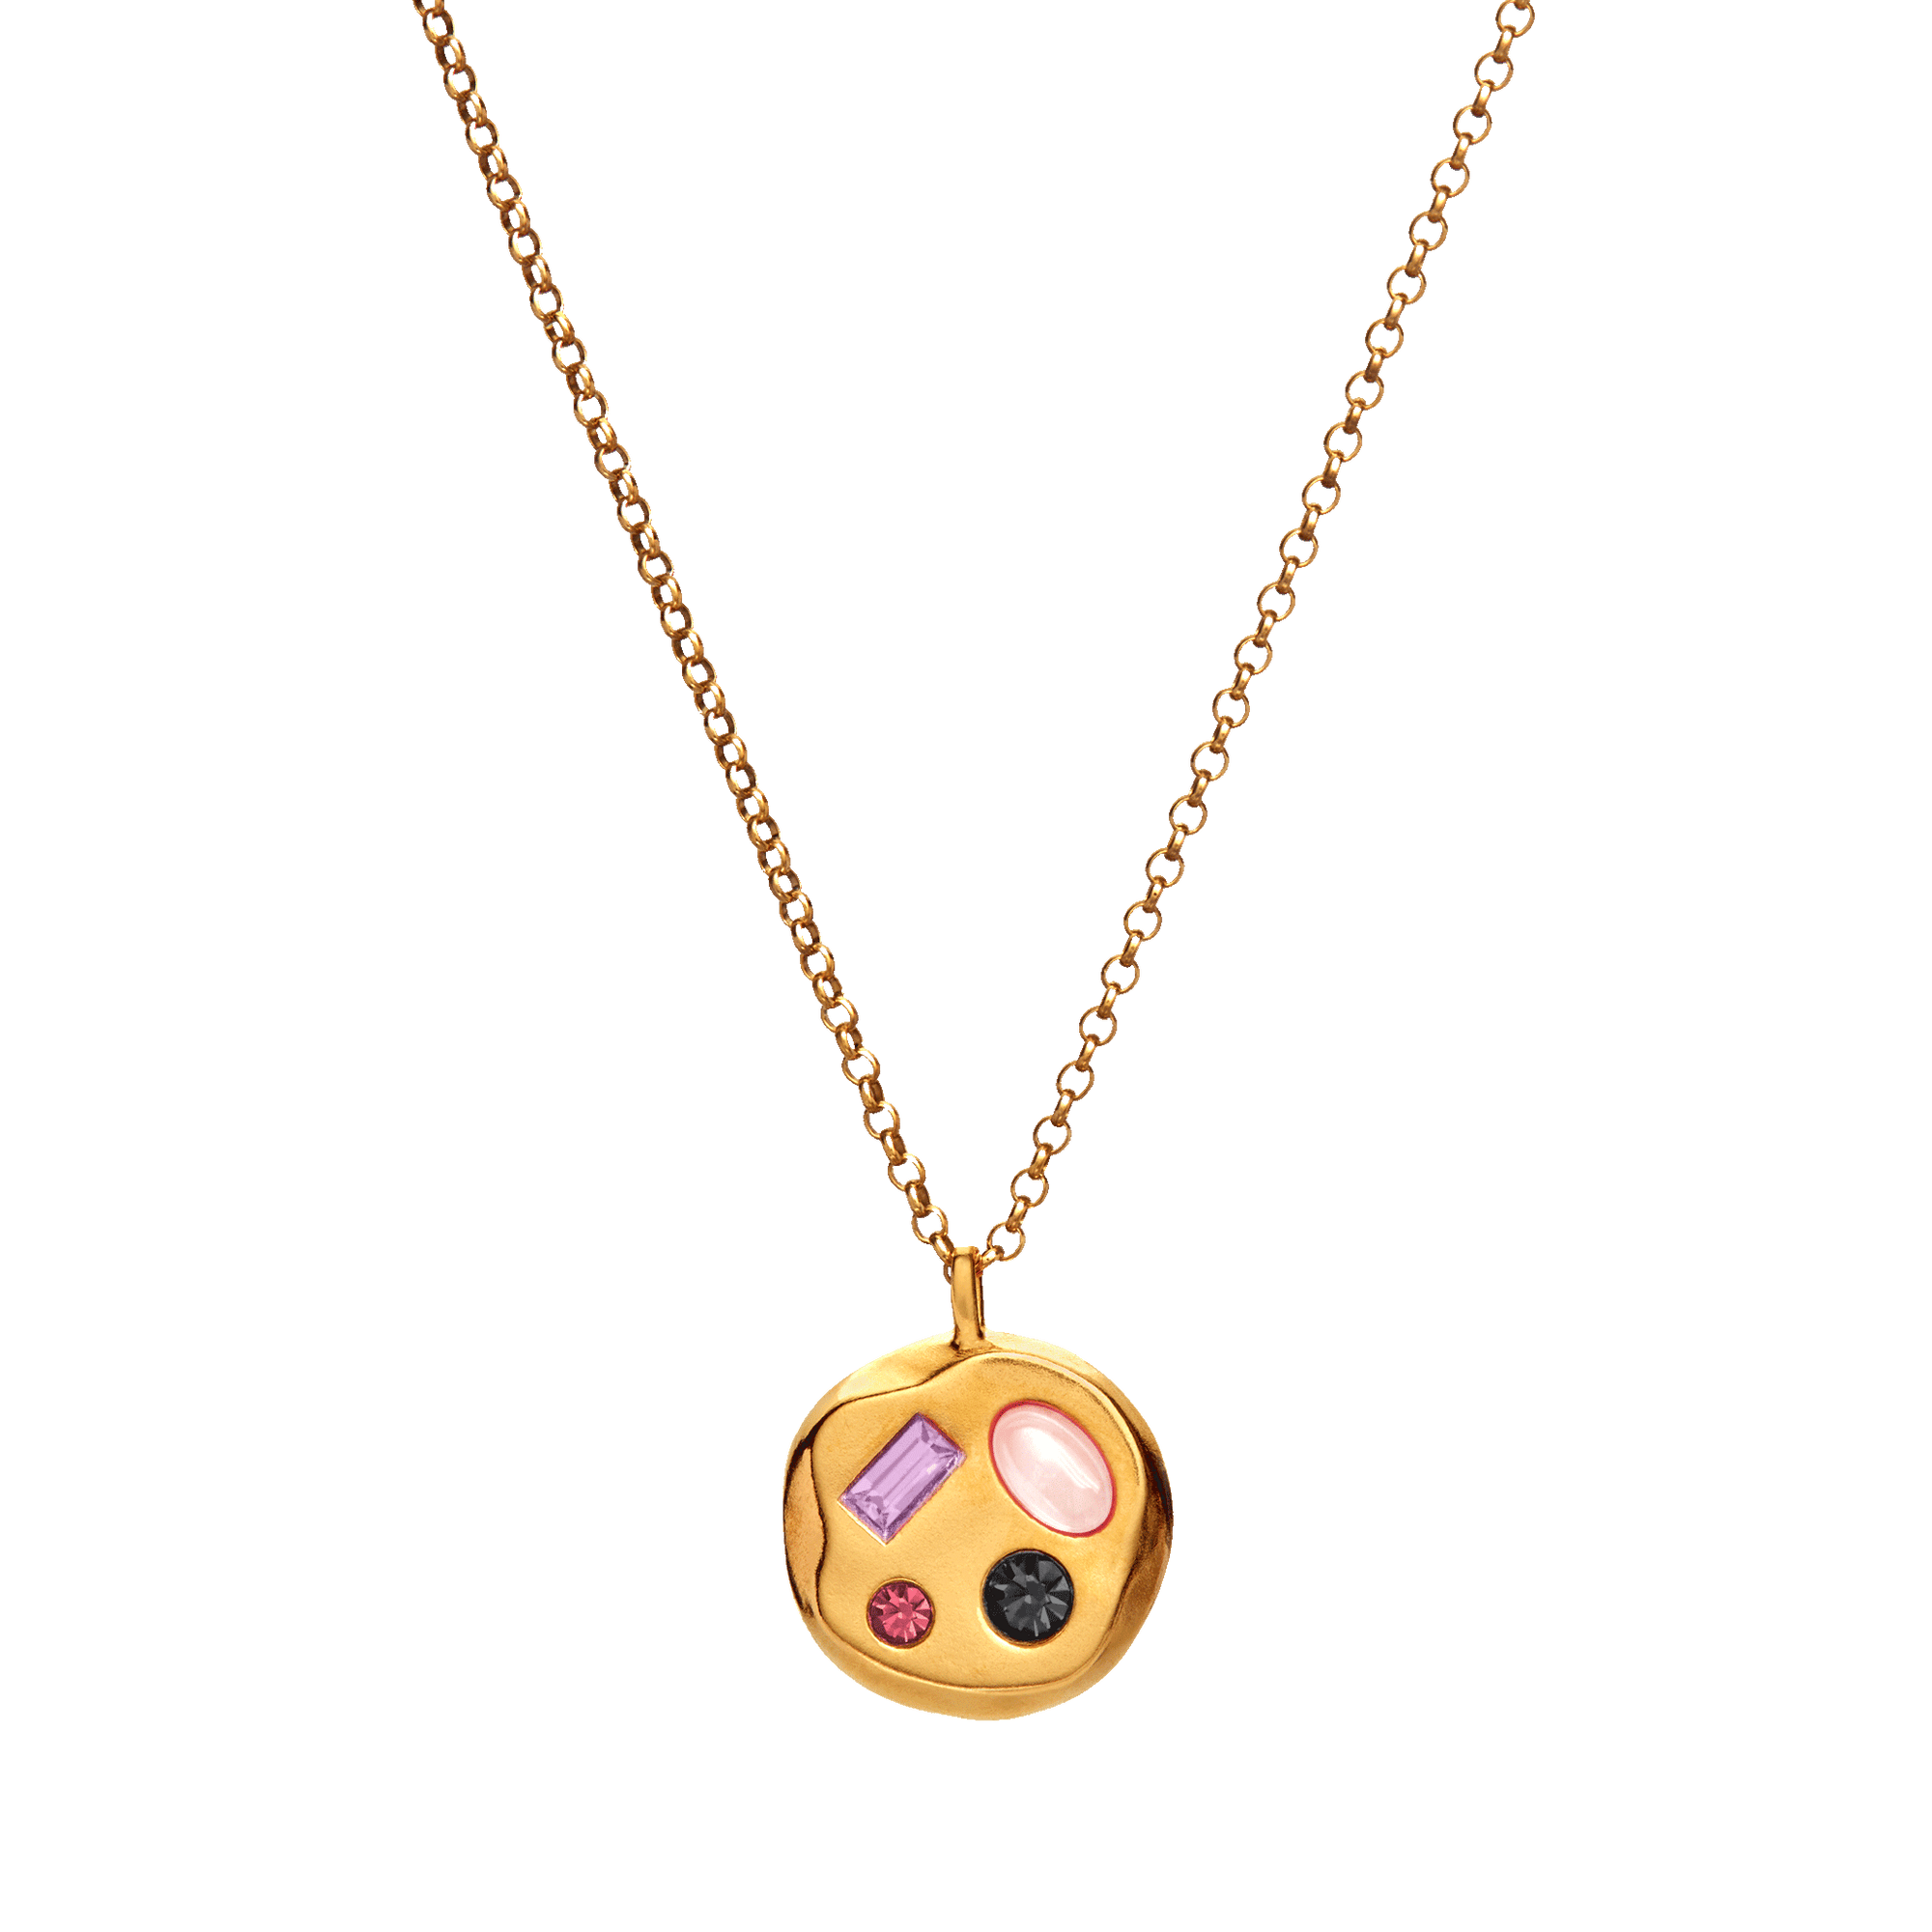 The February First Pendant